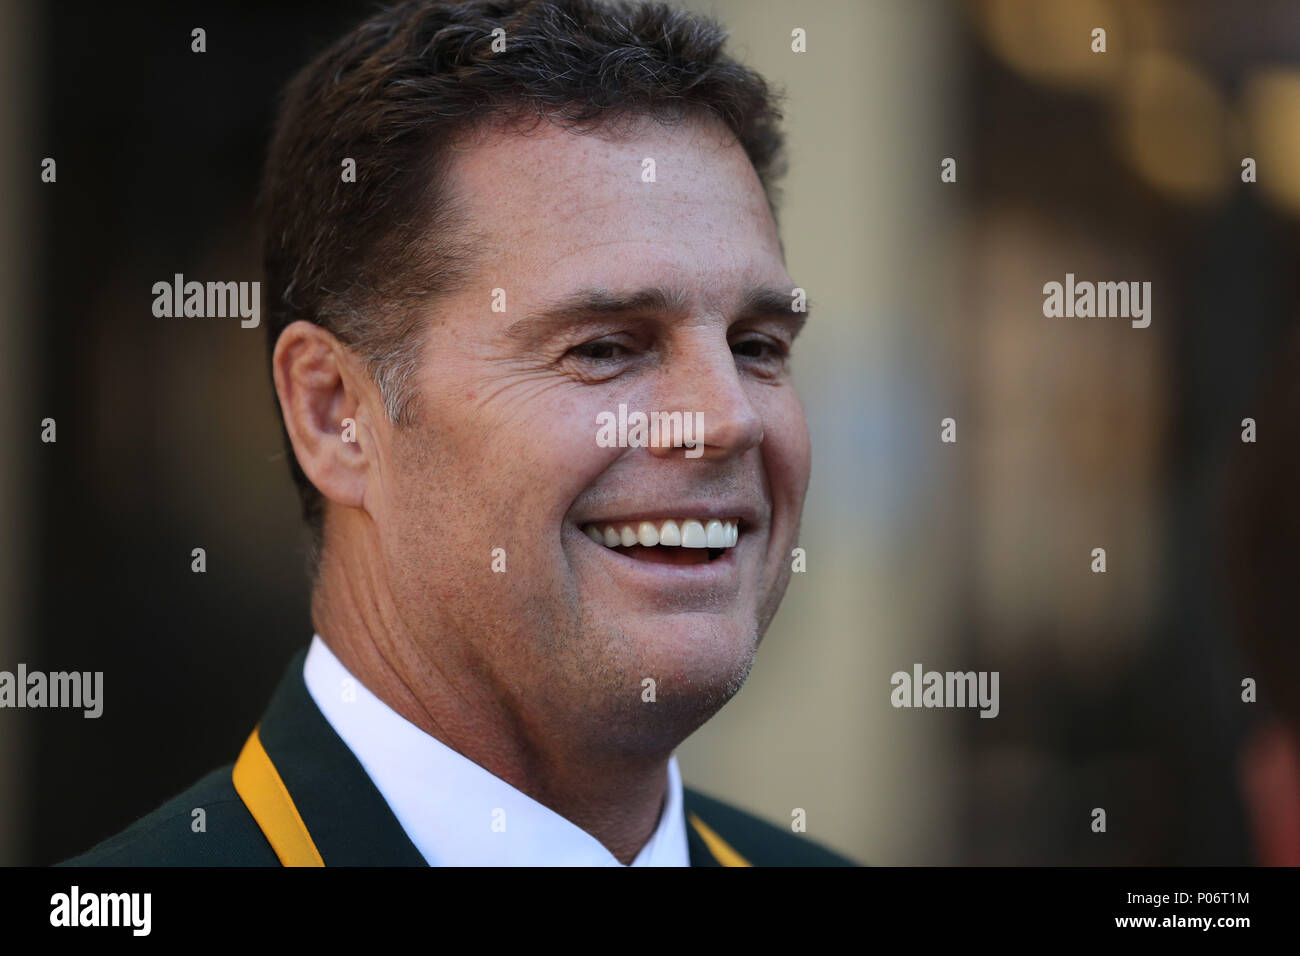 Johannesburg, South Africa. 8th June, 2018. Rassie Erasmus (Head Coach) of South Africa during the South African Springbok team photo, Tsogo Sun Montecasino Hotel Johannesburg Credit: Action Plus Sports/Alamy Live News Stock Photo